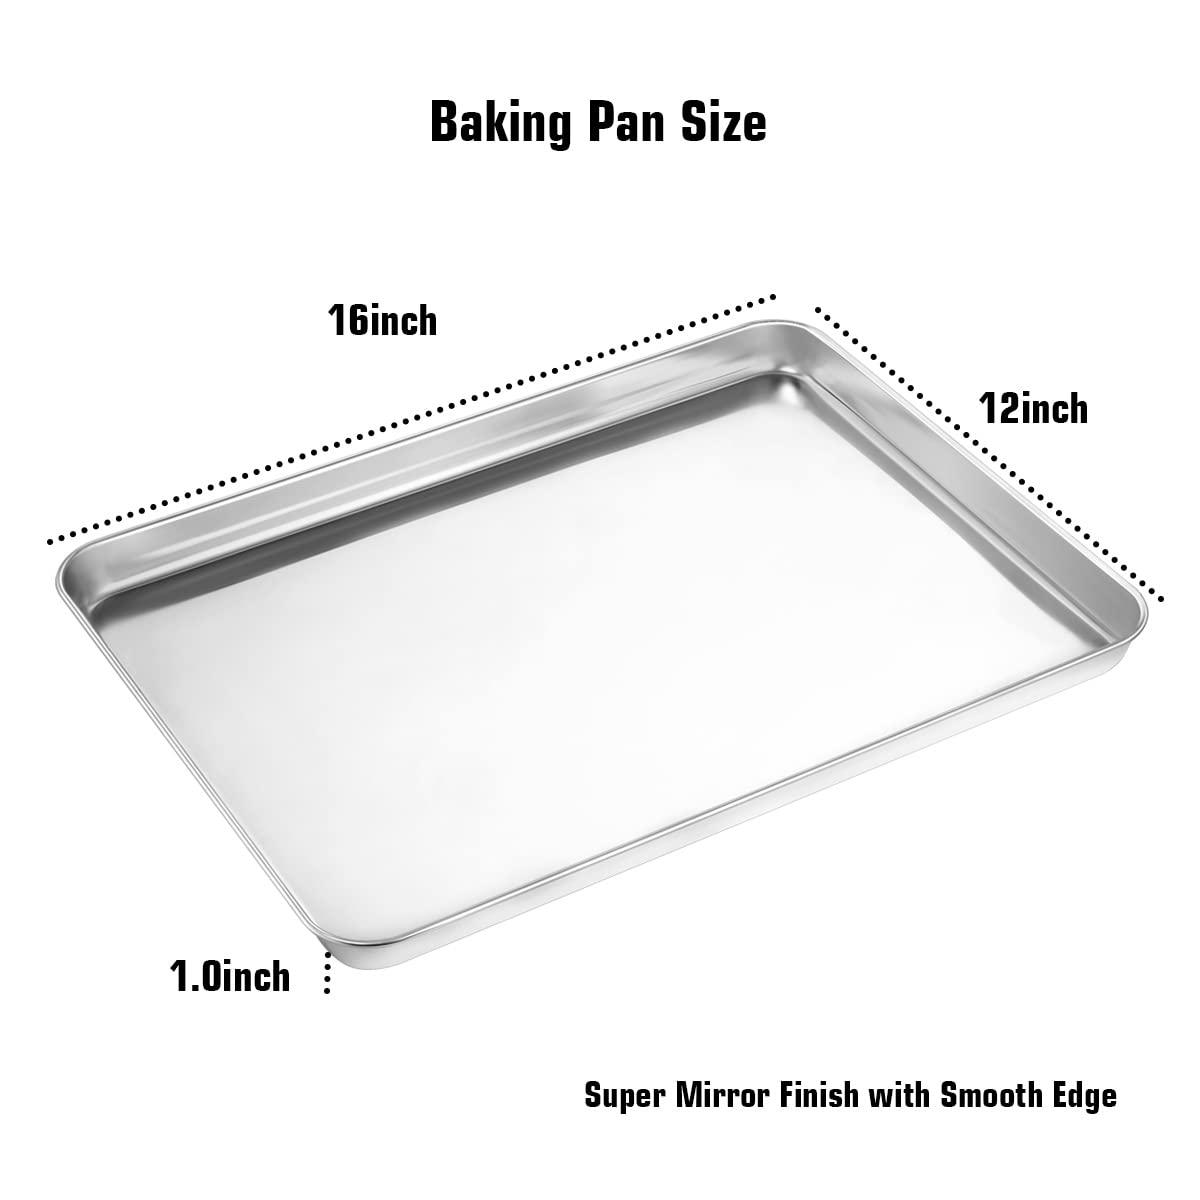 Wildone Baking Sheet & Rack Set [2 Sheets + 2 Racks], Stainless Steel Cookie Pan with Cooling Rack, Size 16 x 12 x 1 Inch, Non Toxic & Heavy Duty & Easy Clean - CookCave